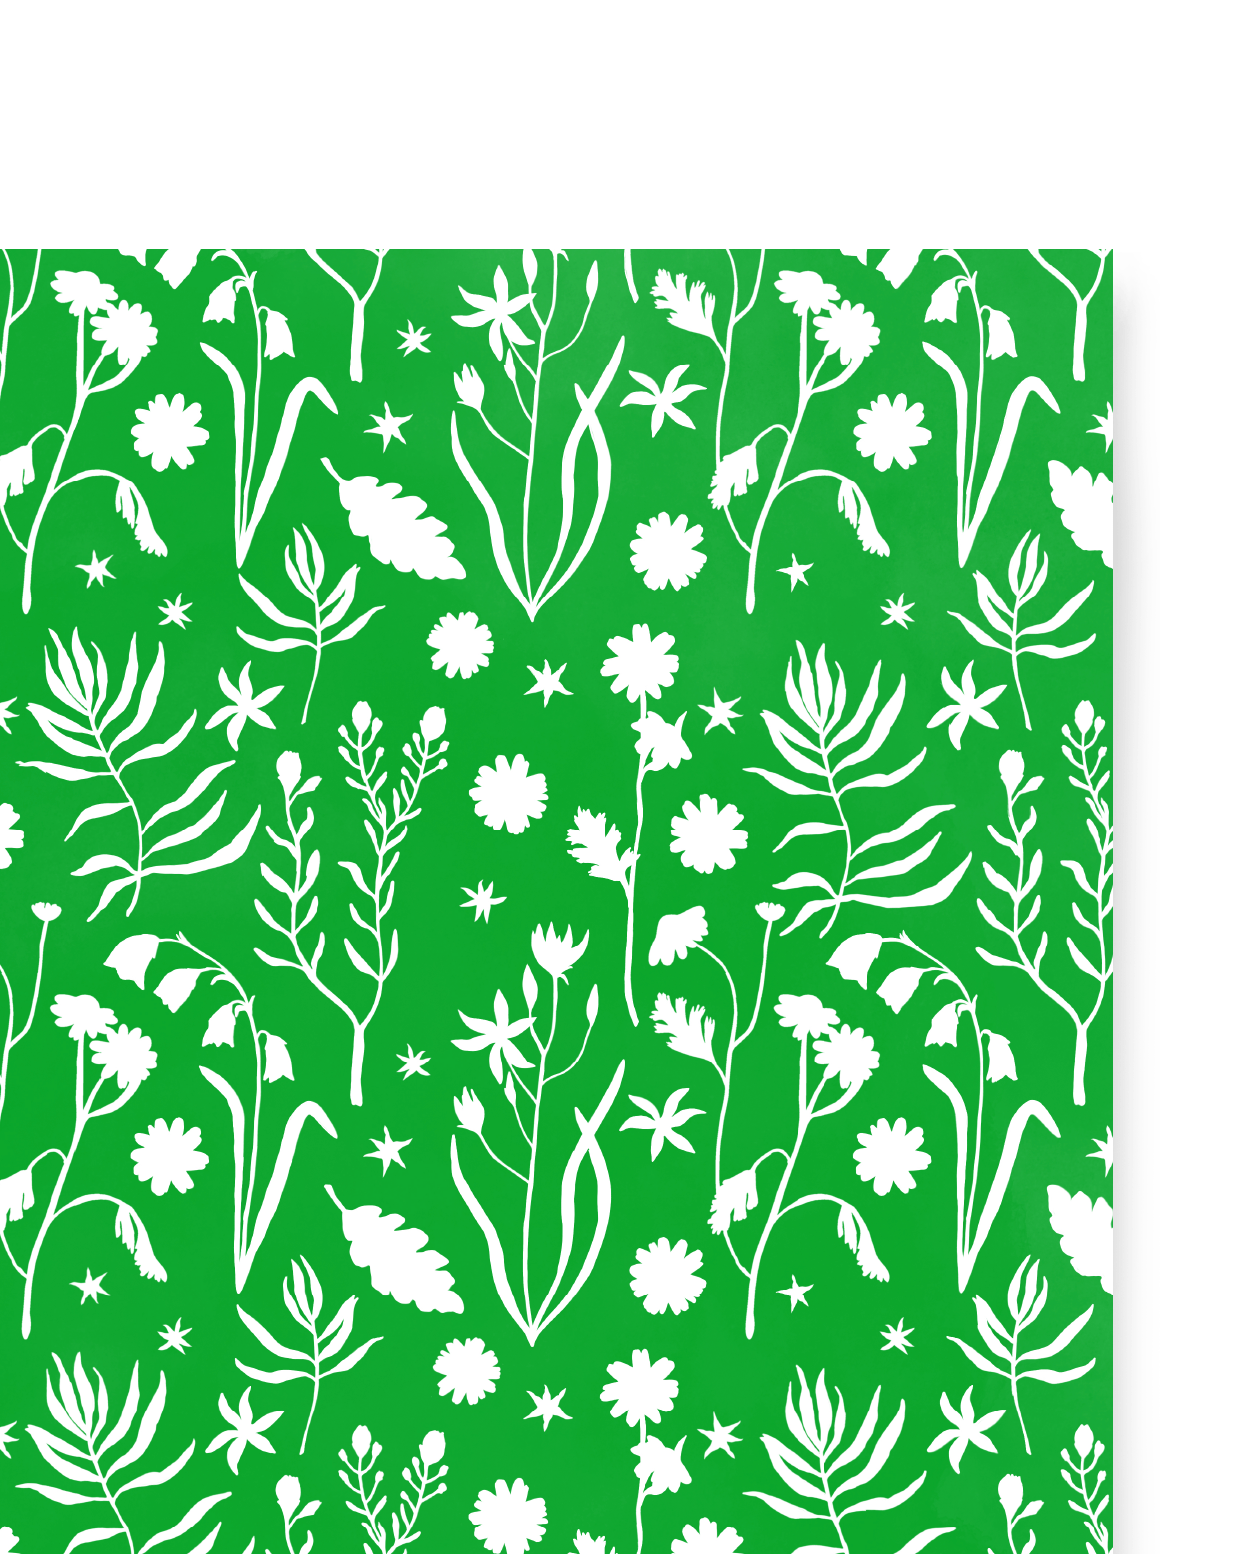 This holiday gift wrap features various kinds of flora printed on a primary green background.